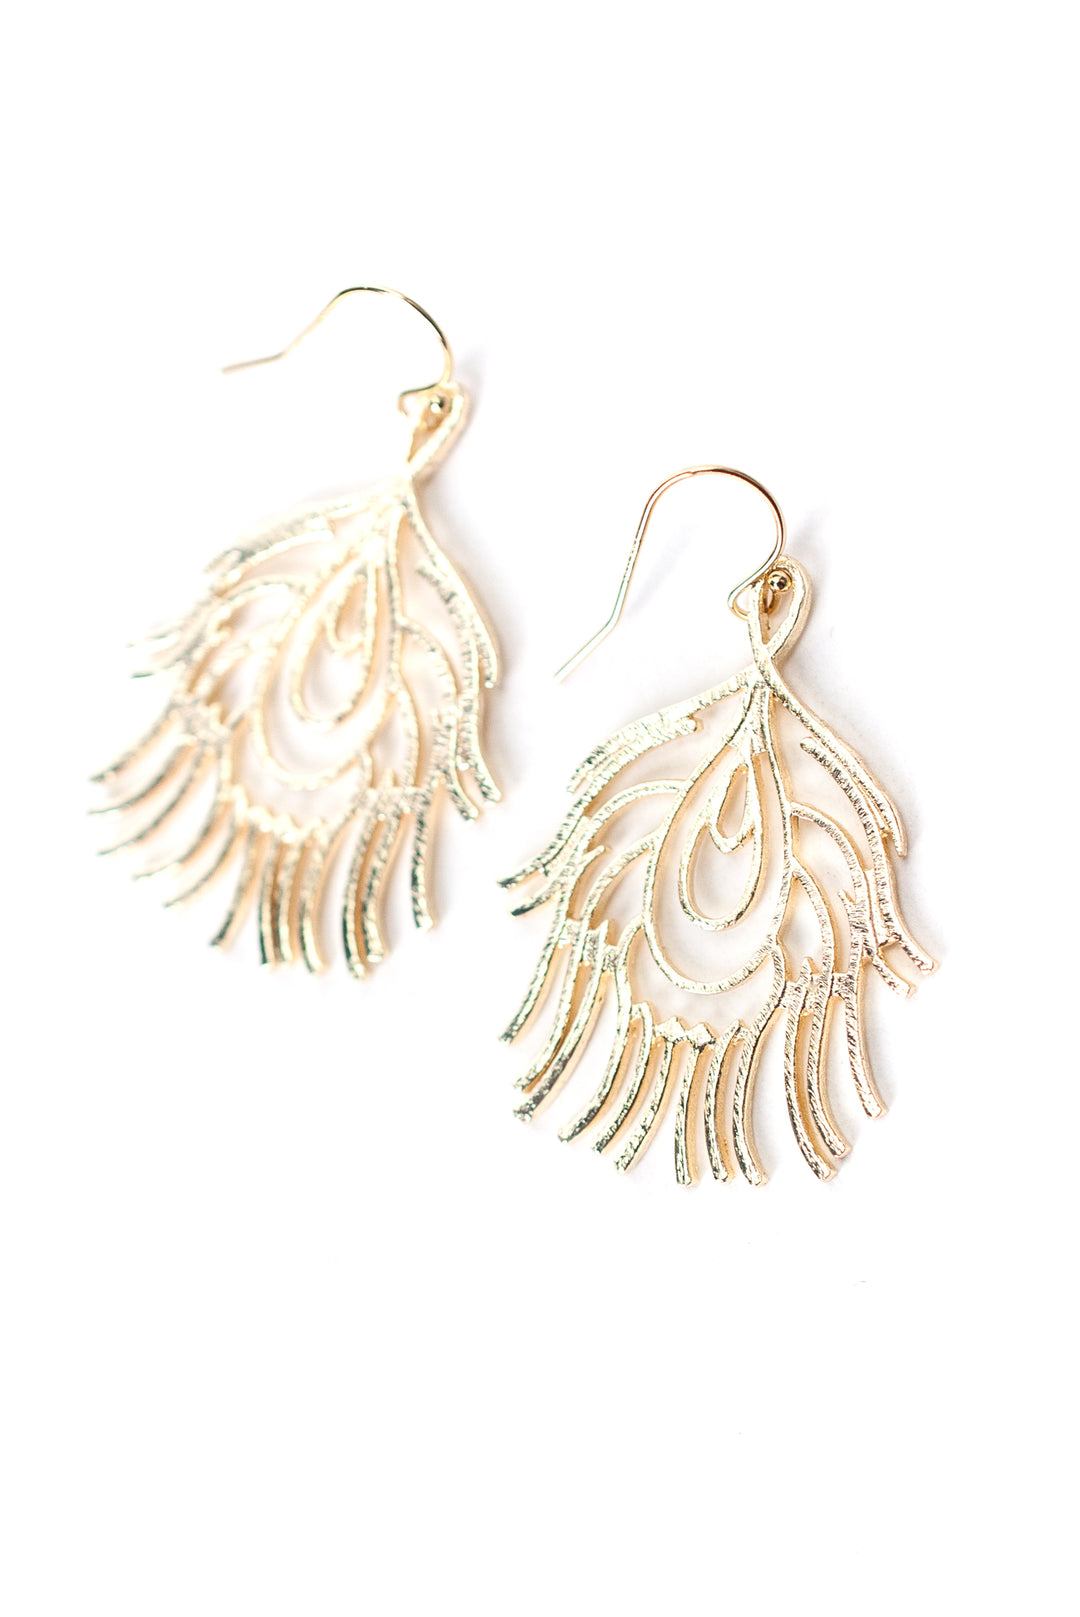 Brushed Gold Peacock Feather Earrings